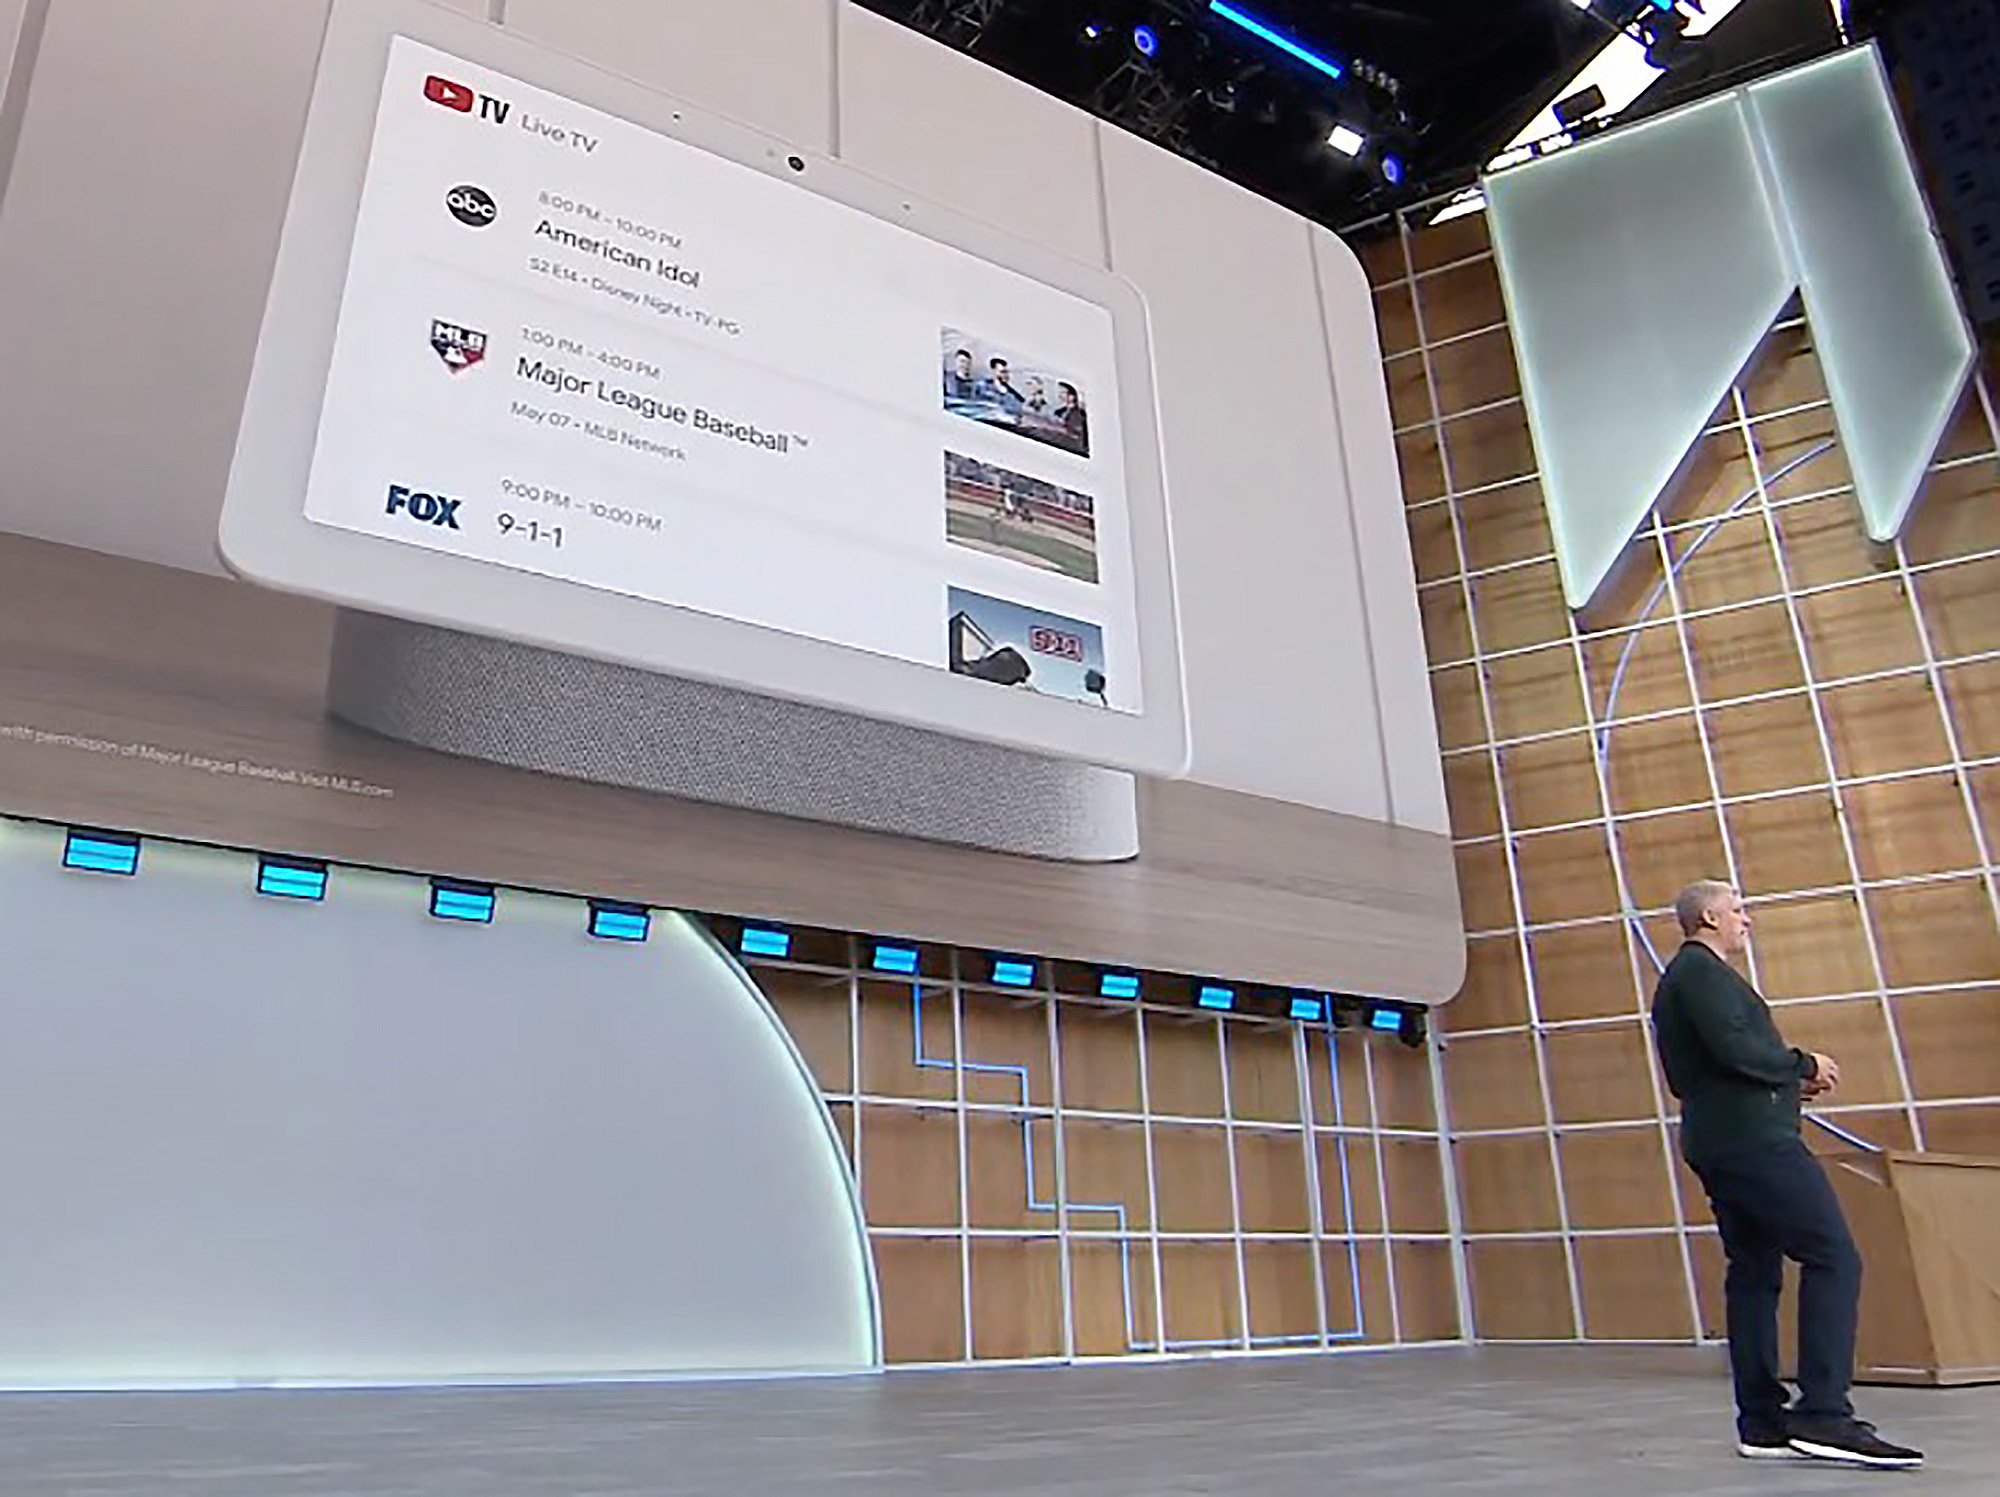 Youtube Tv Is Getting A New On Screen Guide On Smart Home Screens What To Watch